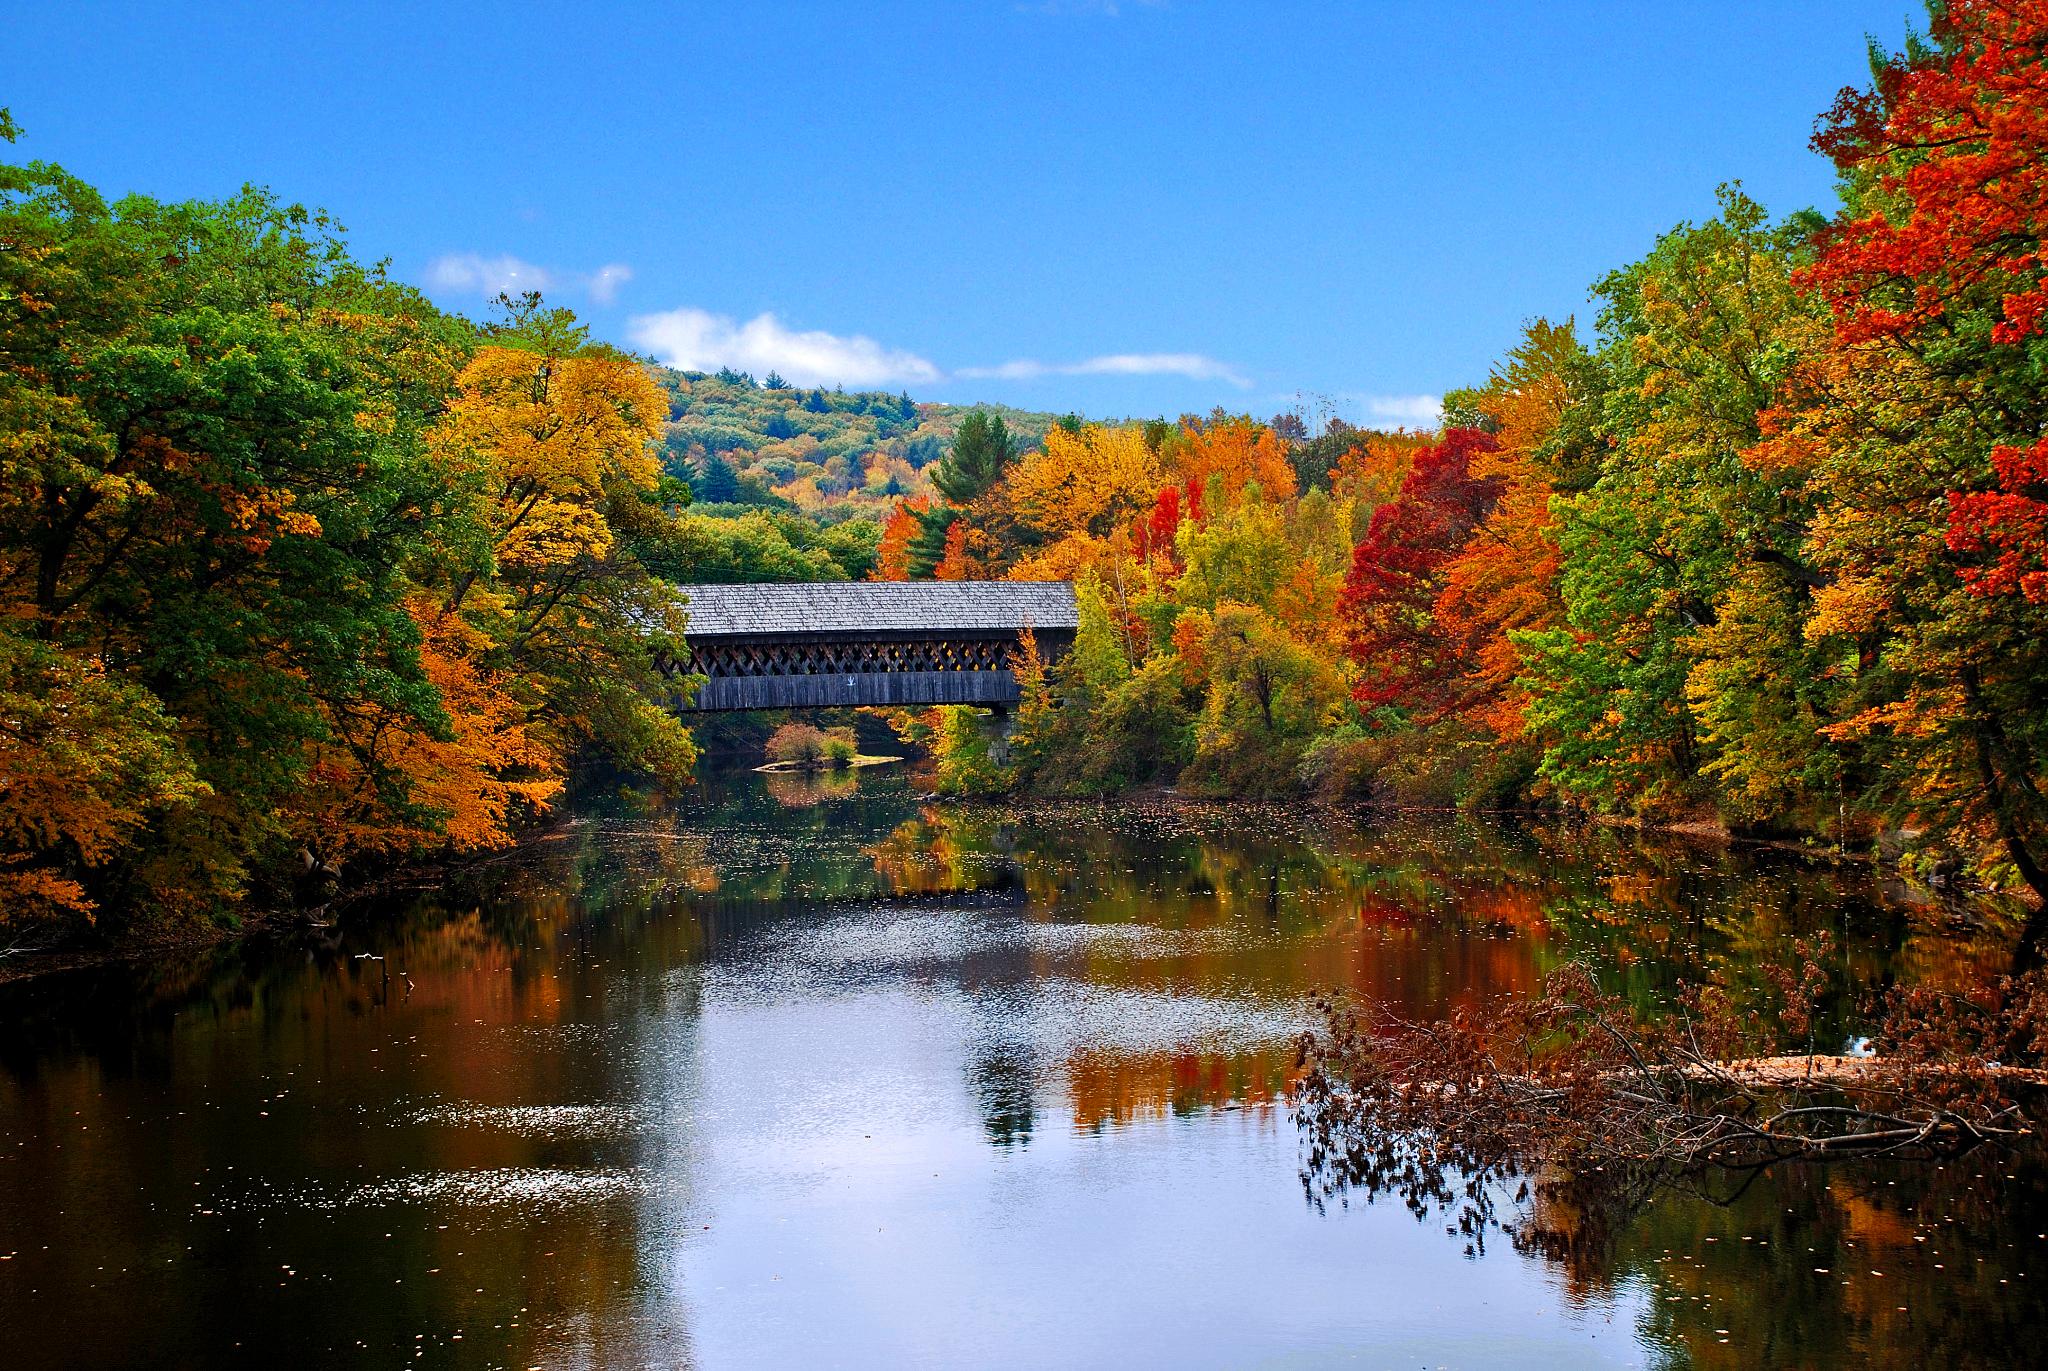 Bridge Over The Contoocook In Henniker, Nh (user submitted)